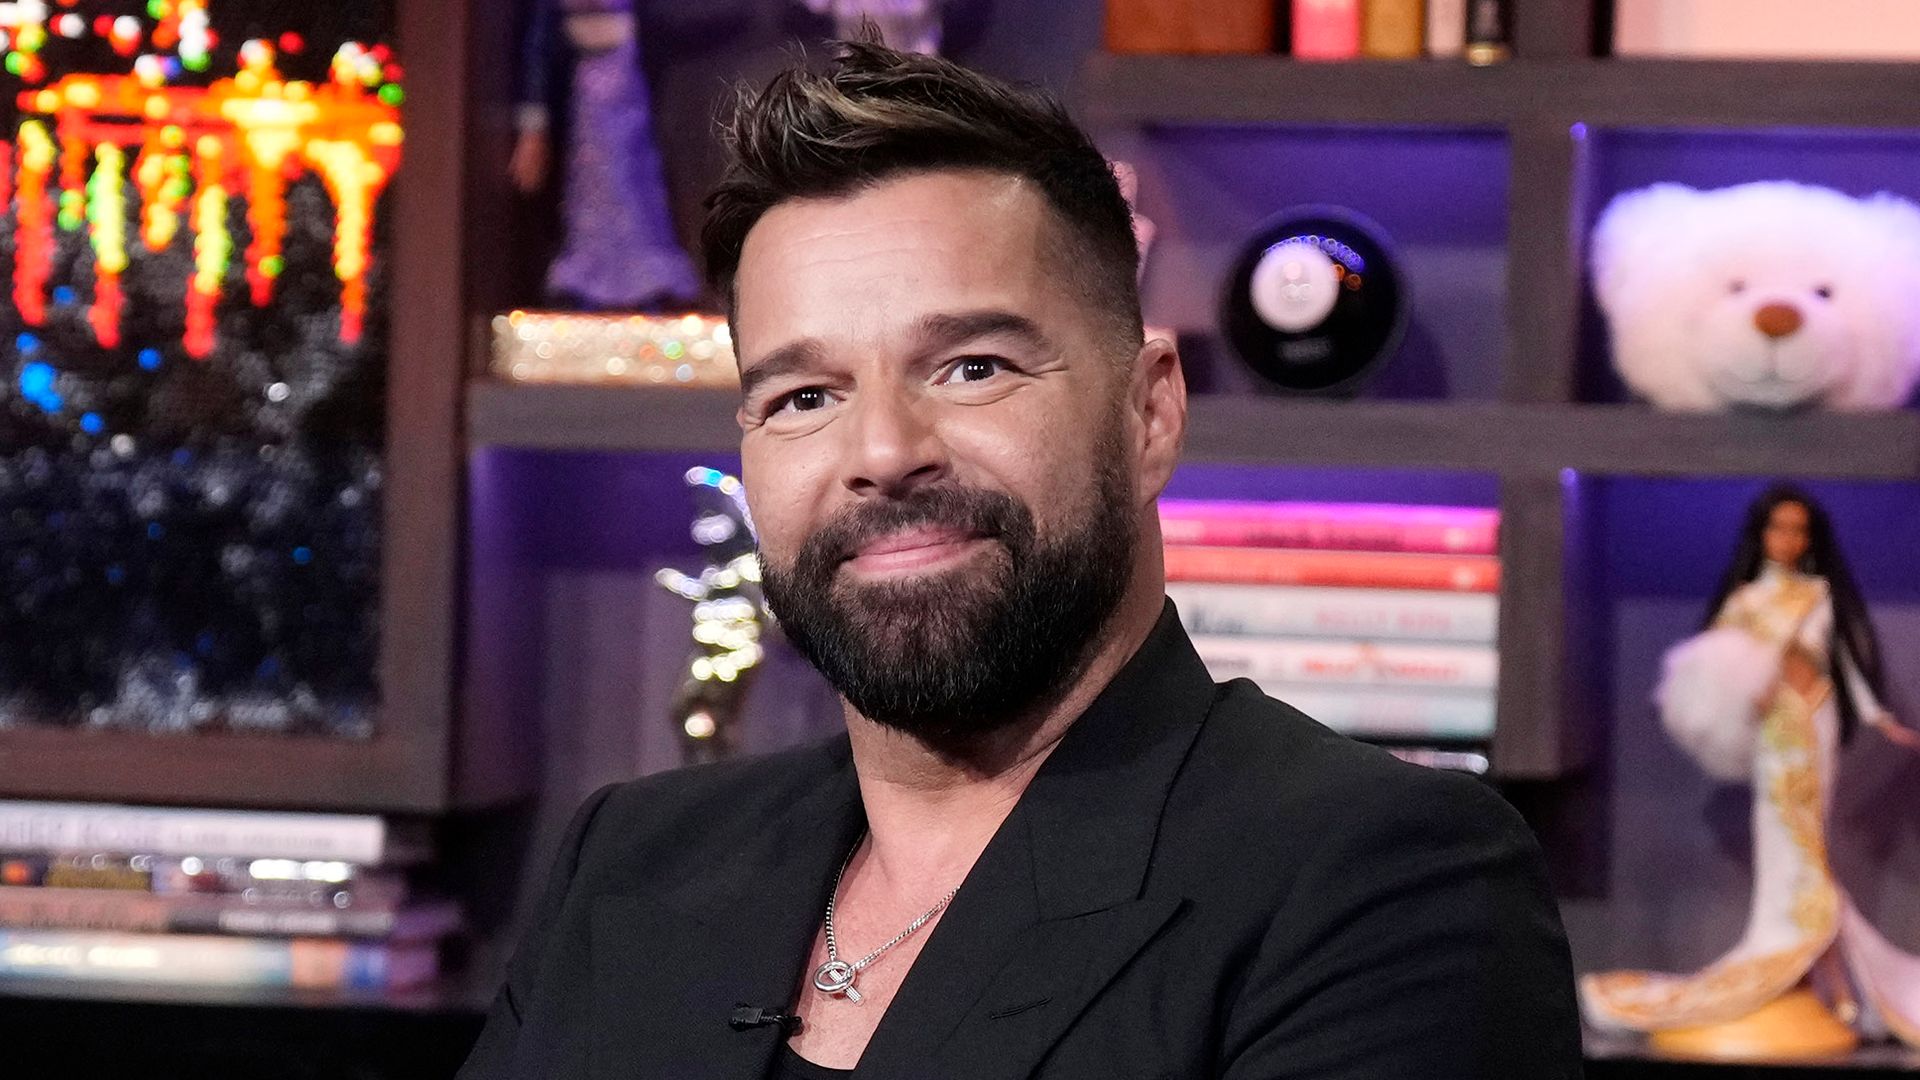 Ricky Martin candidly opens up about divorce and parenting four kids as a single dad: 'I went through so much'